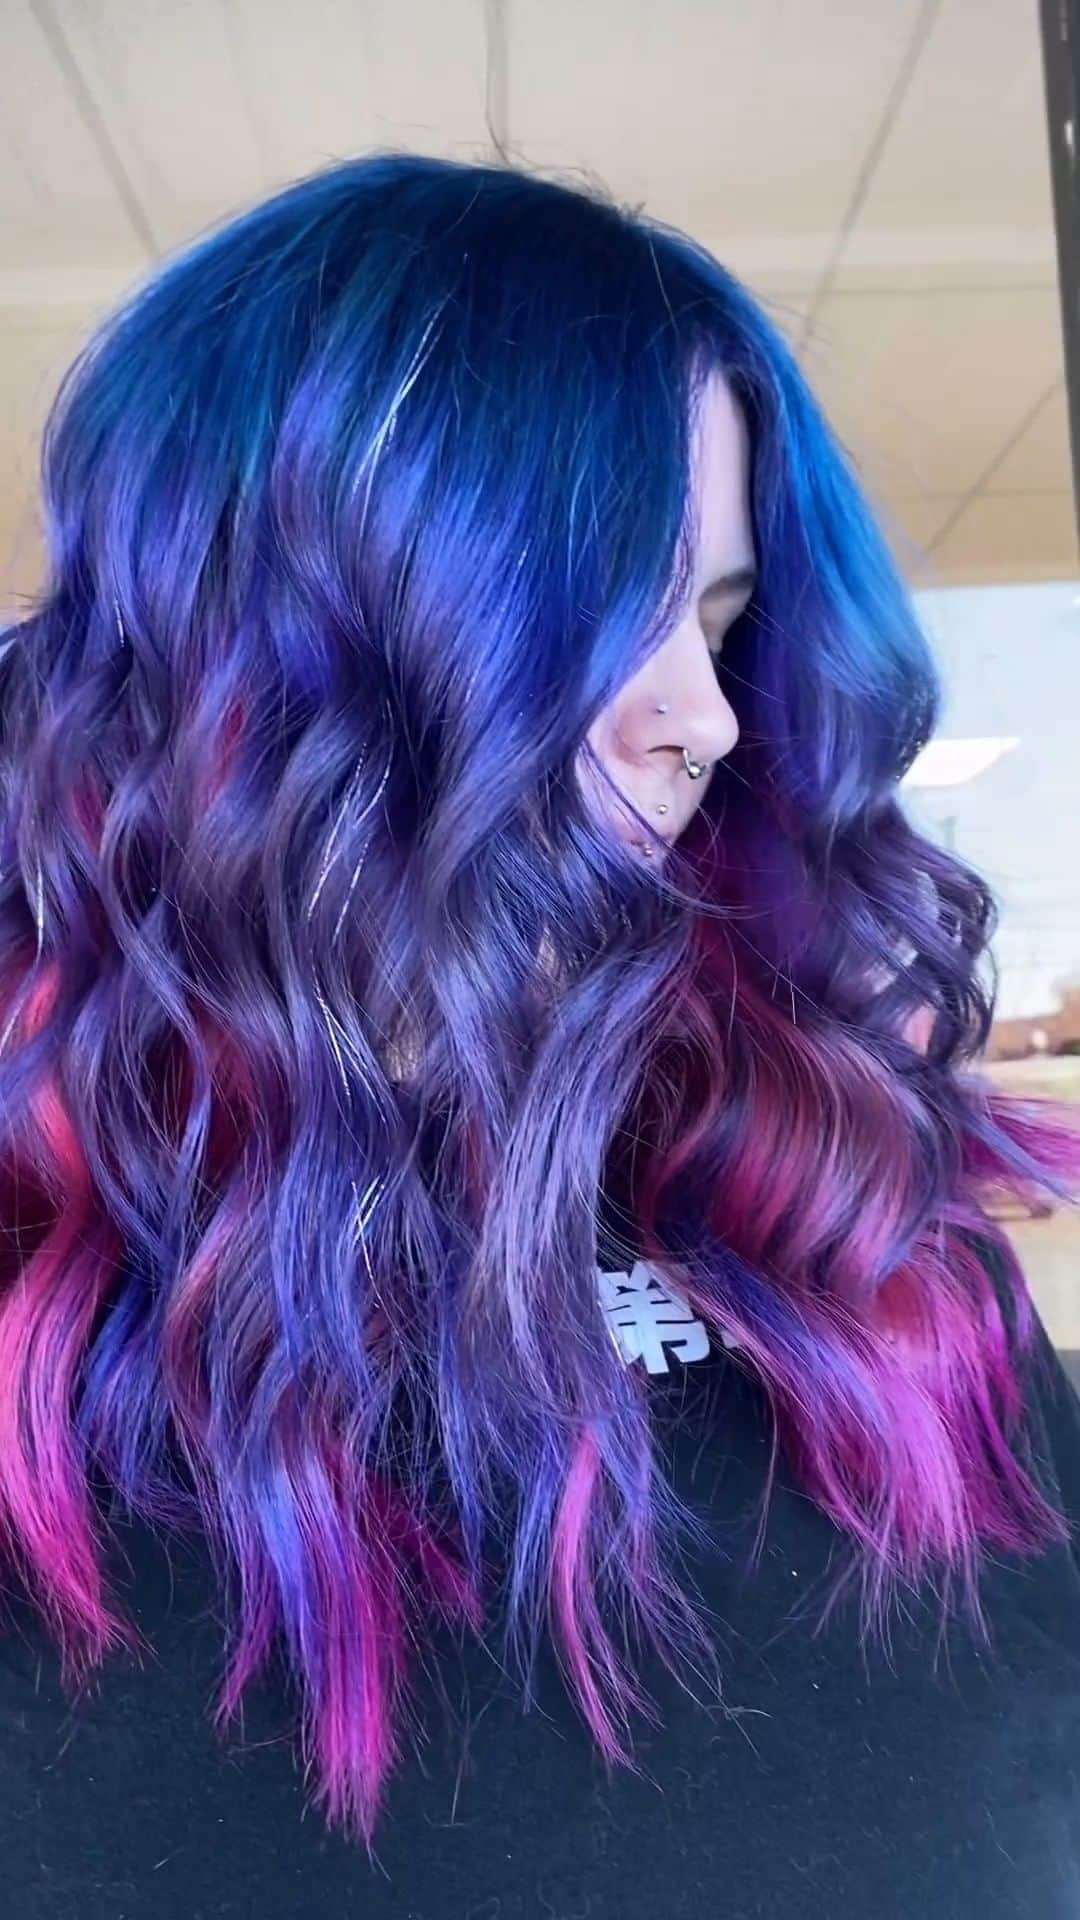 CosmoProf Beautyのインスタグラム：「Give @Vanity_ByRose a tube of @DangerJonesCreative Masquerade and watch the magic ✨ happen!  What do you think of this warm purple on the ends? Would you have used Masquerade differently?  Today and tomorrow (12/4 - 12/5), we are offering 20% off all @DangerJonesCreative purple hair color, including the *NEW* Masquerade!  #CosmoProf #DangerJonesCreative #FlashSale #PurpleHair #VividHairstylist #VividHair #VividHairTransformation #VividHairDesign」